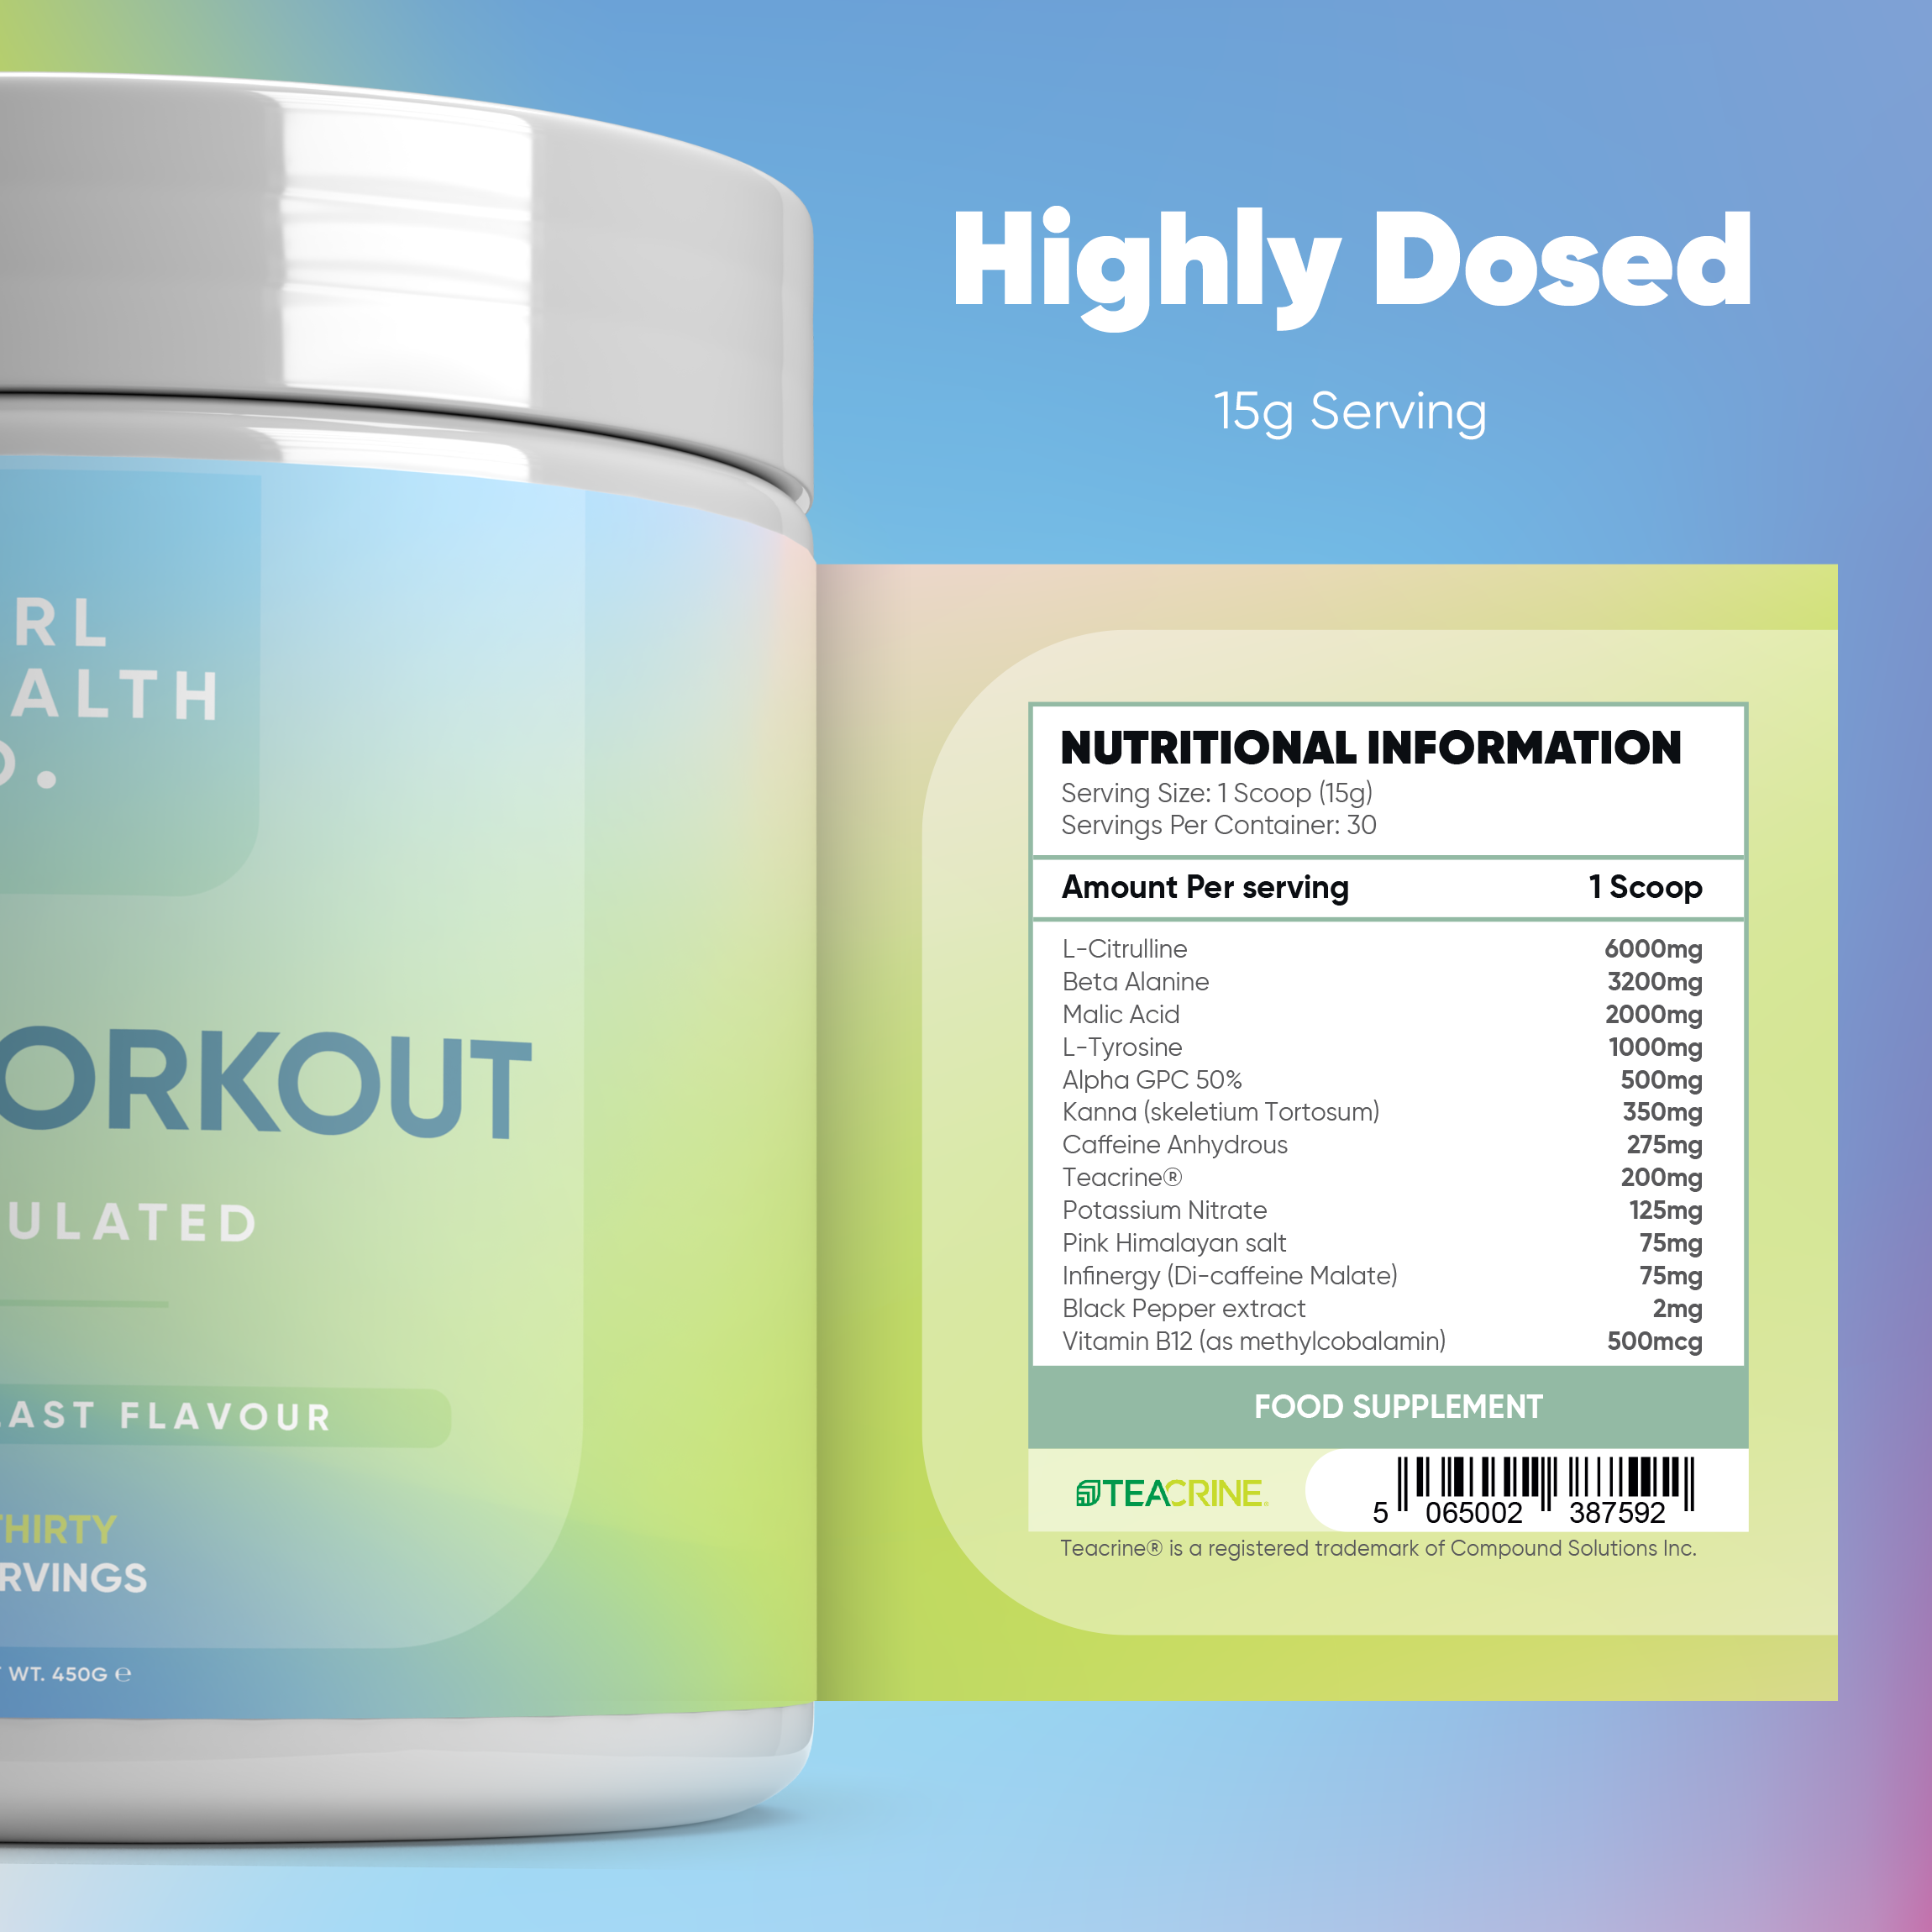 NTRL Health Co. Stimulated Pre-Workout